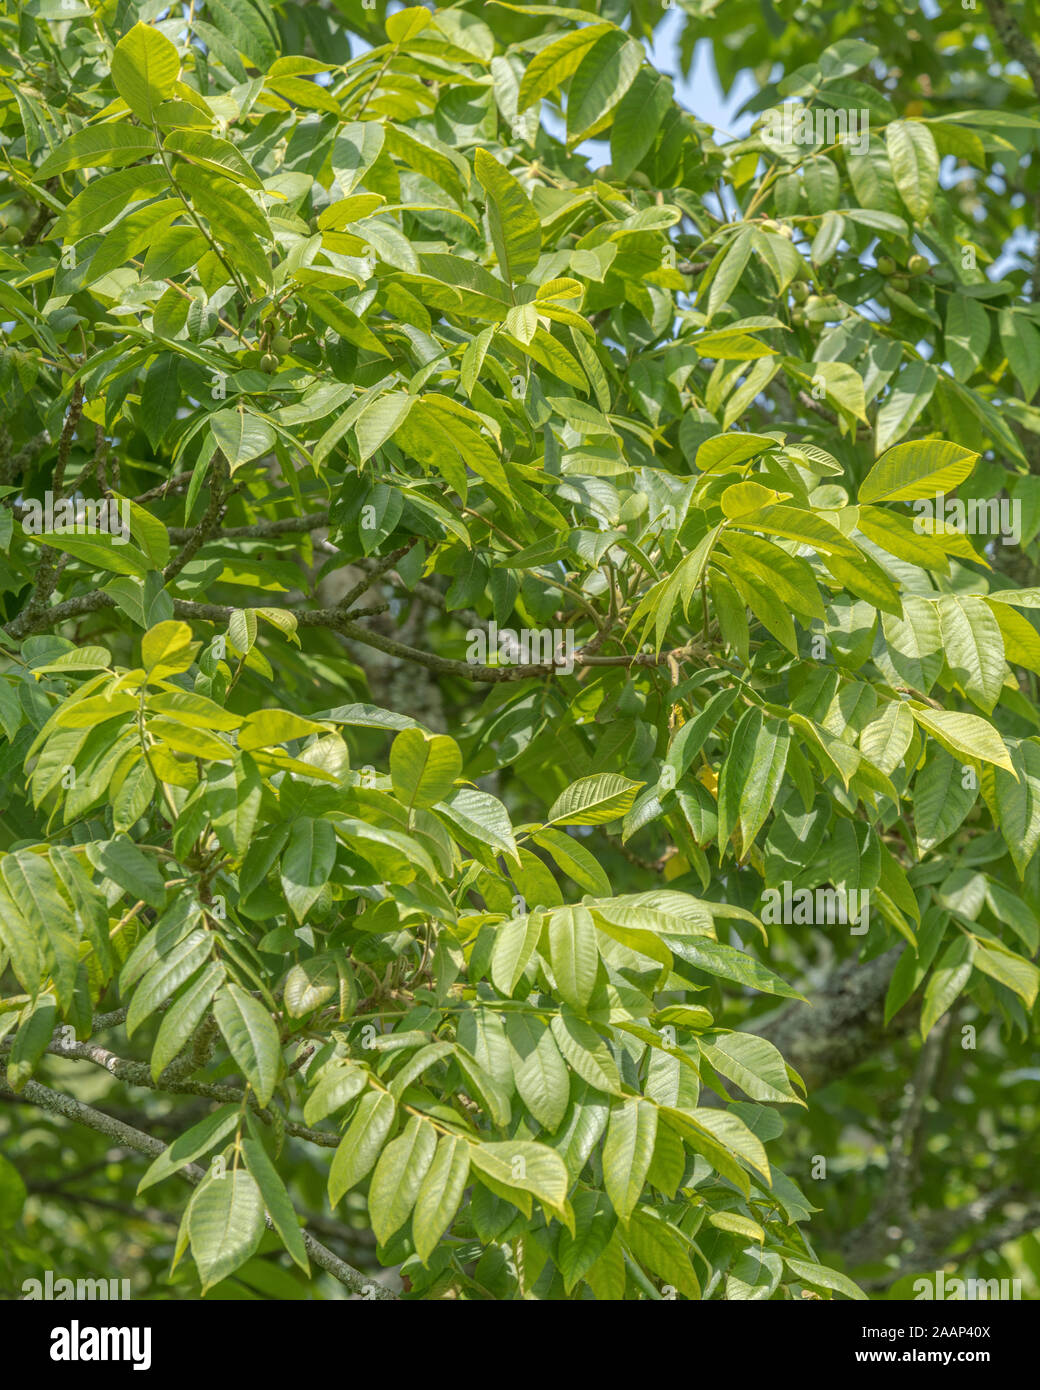 Summertime leaves and foliage of Japanese Walnut - Juglans ailantifolia. Parts used in medicinal remedies, herbal remedies. SEE NOTES Stock Photo